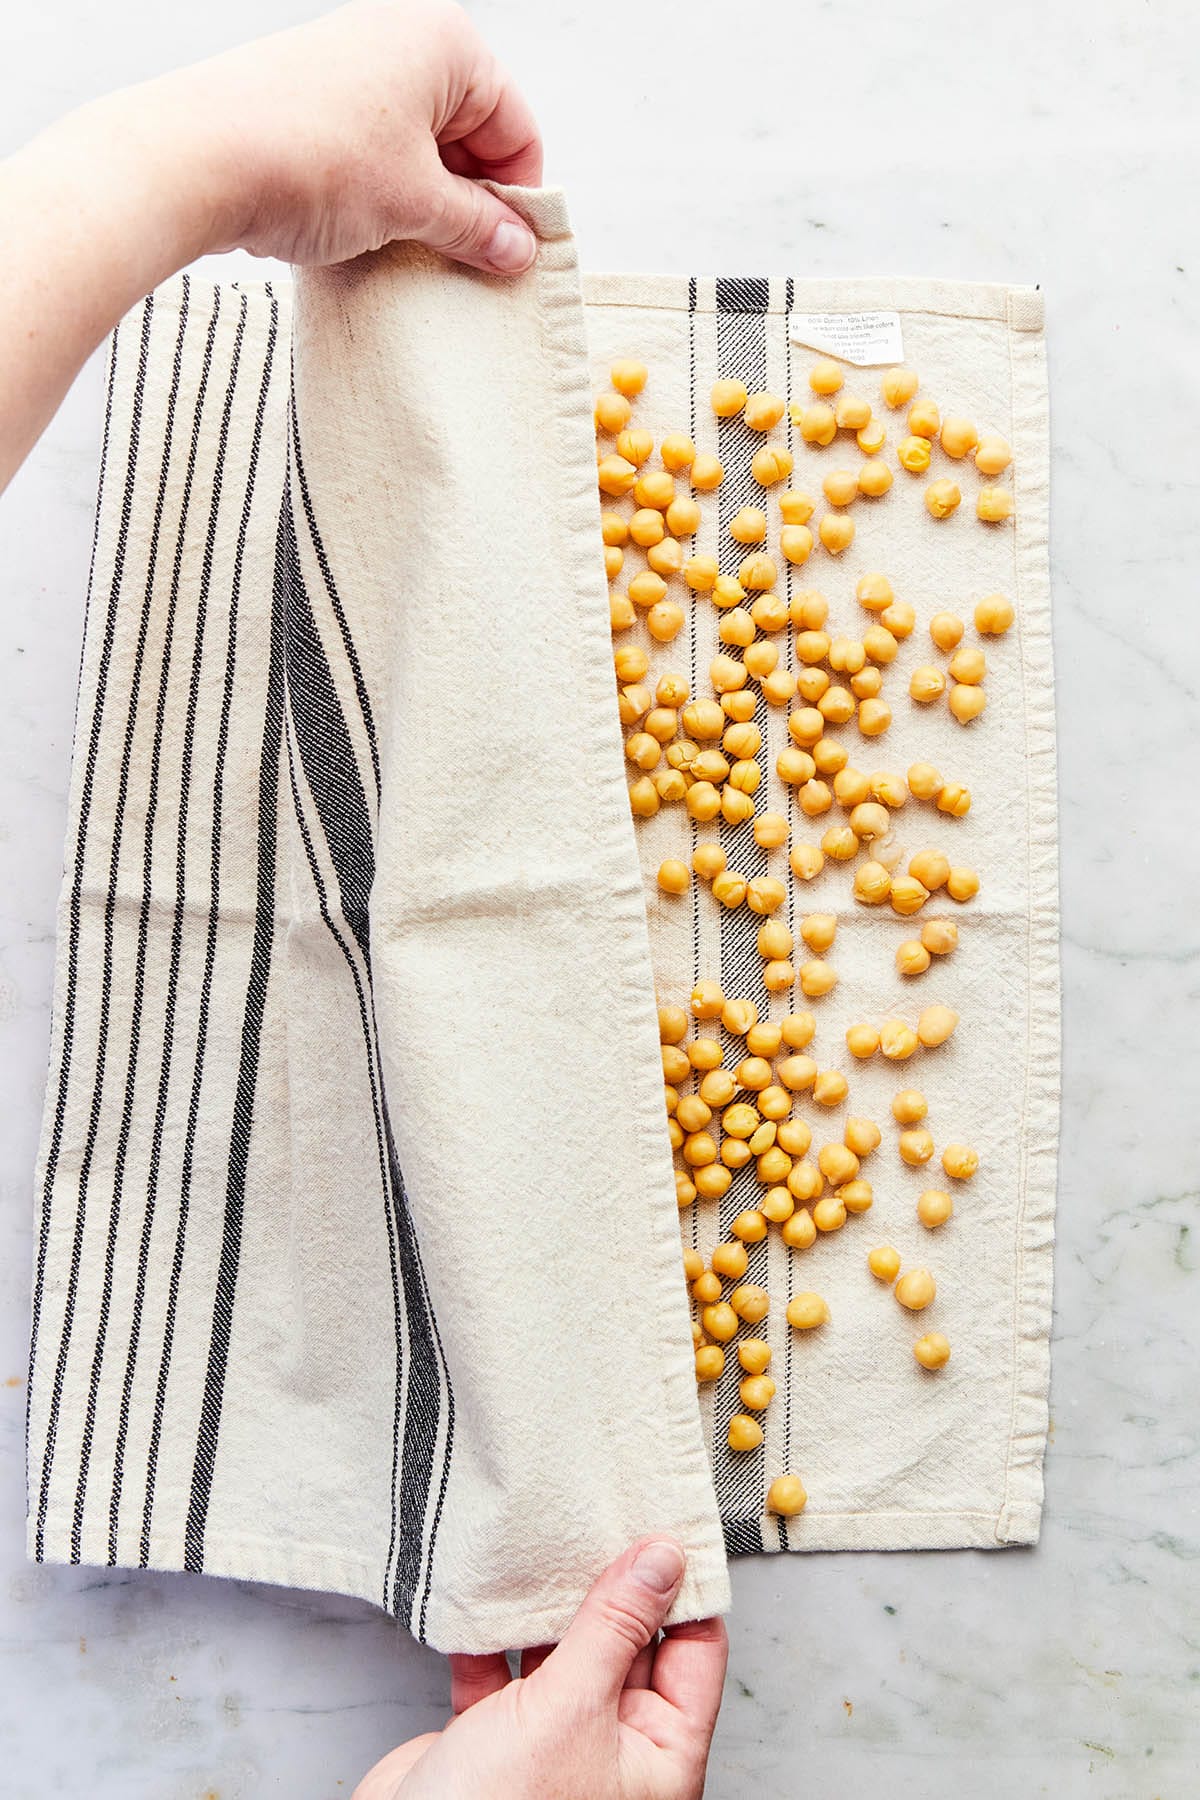 Hands covering chickpeas on a tea towel with the other half of the towel.